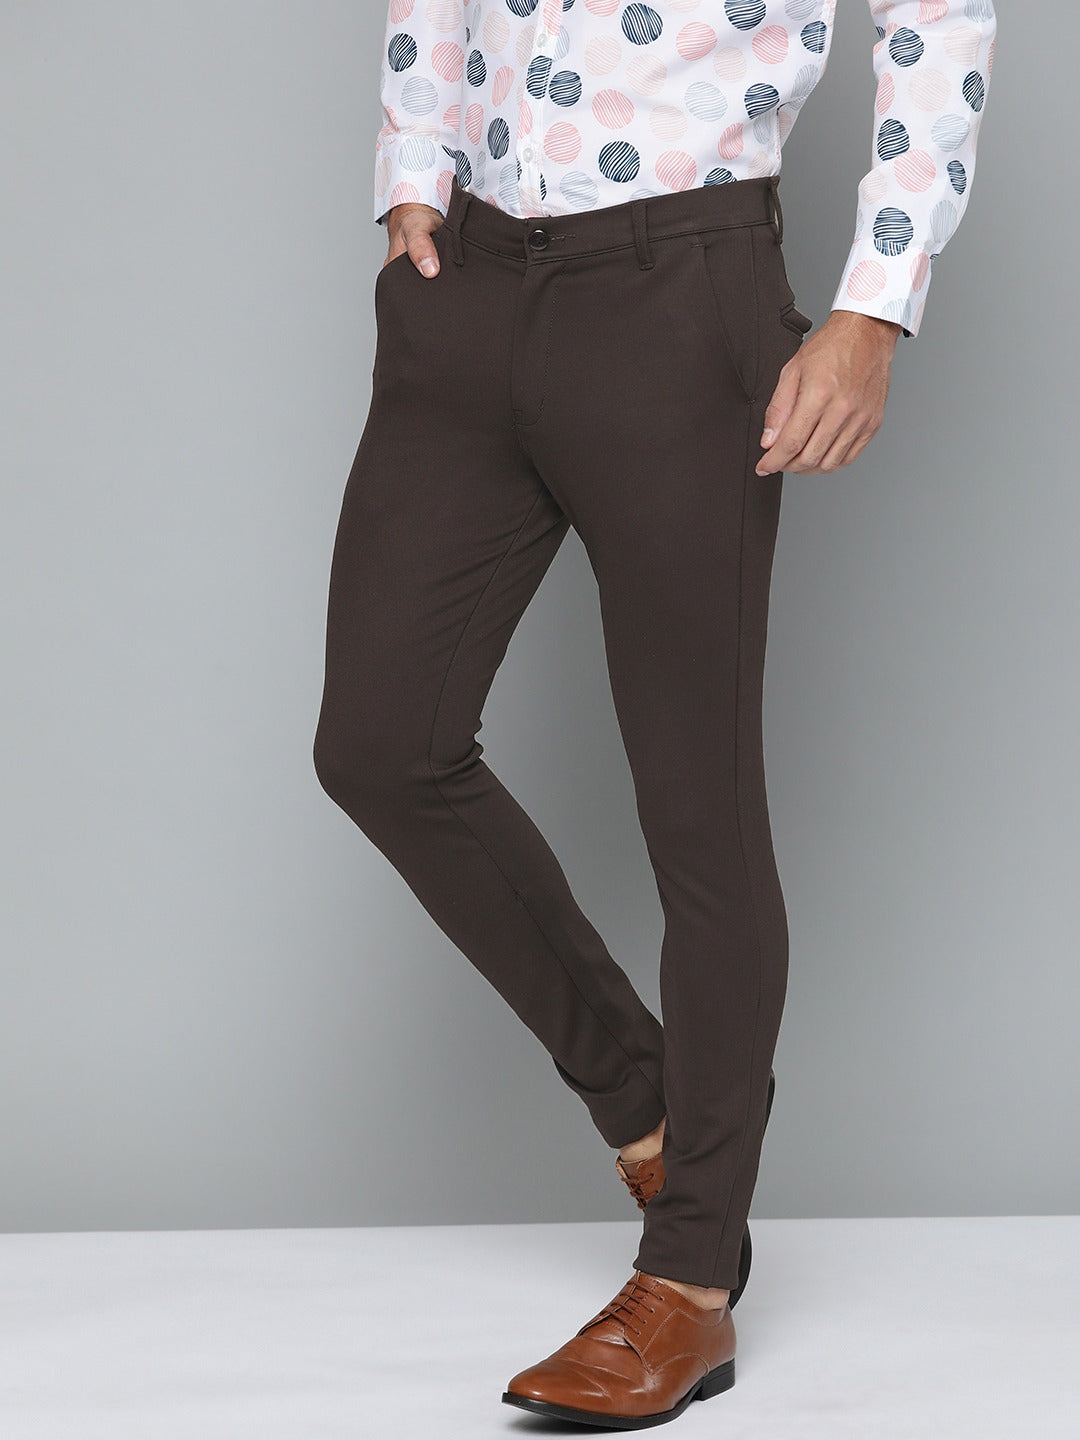 DENNISON Men Brown Smart Tapered Fit Easy Wash Chinos Trousers